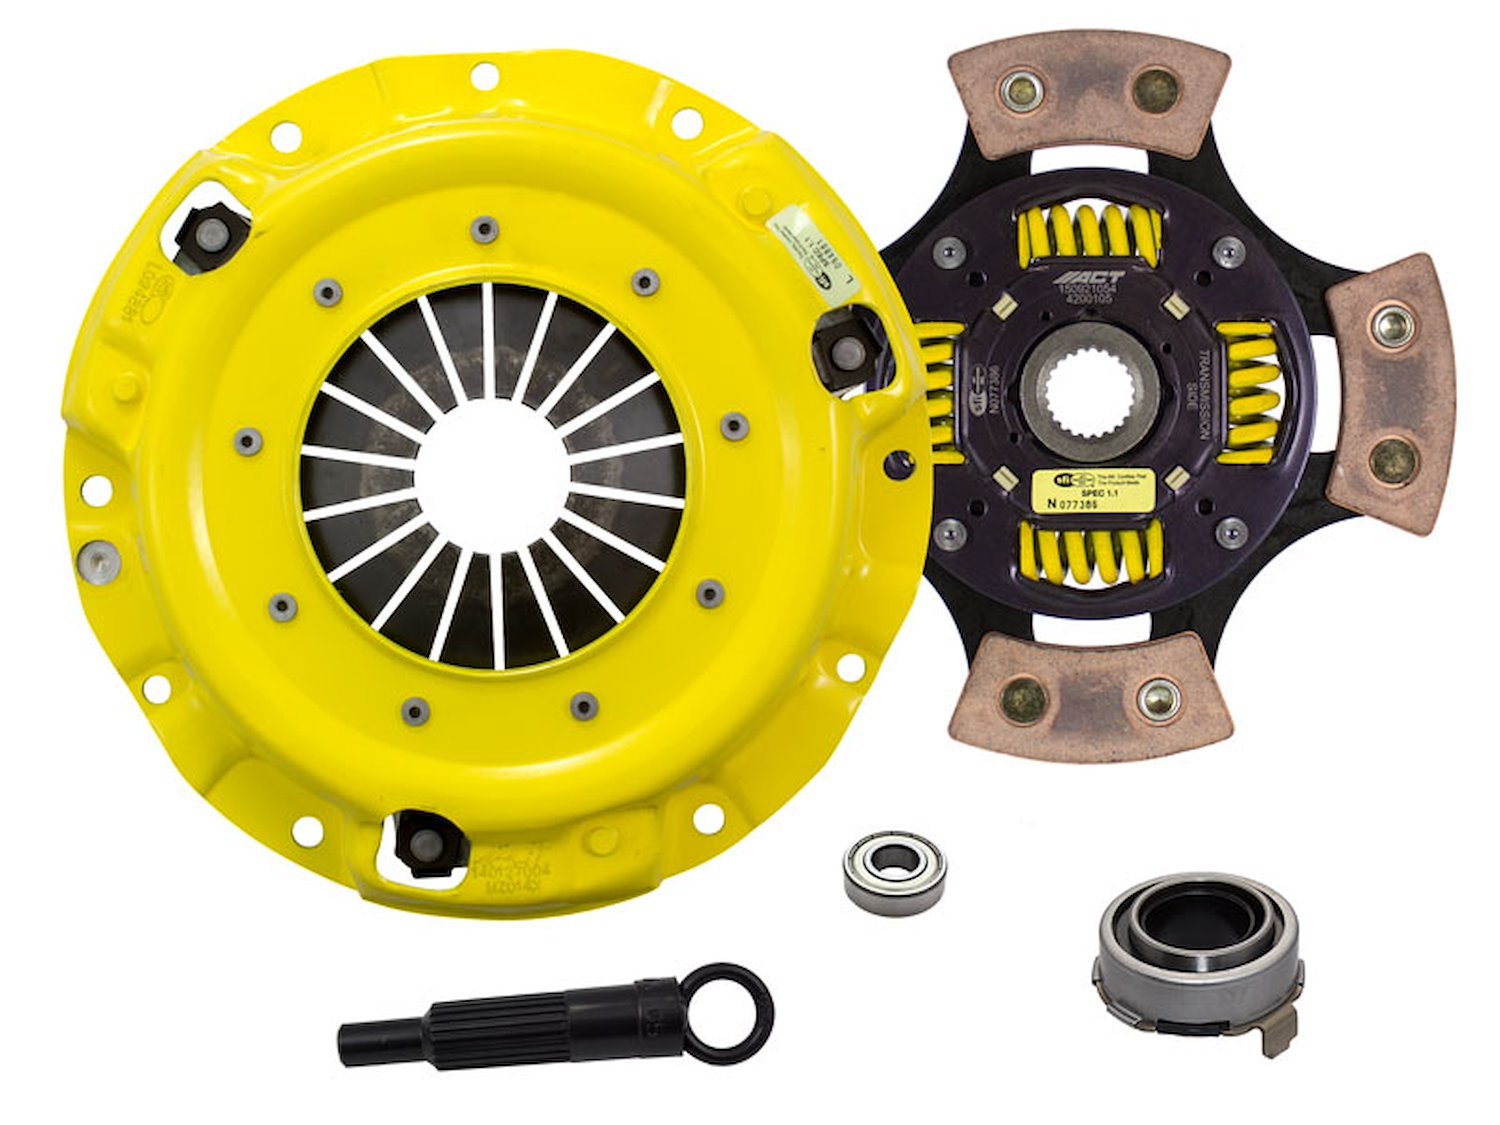 XT/Race Sprung 4-Pad Transmission Clutch Kit Fits Select Ford/Lincoln/Mercury/Mazda